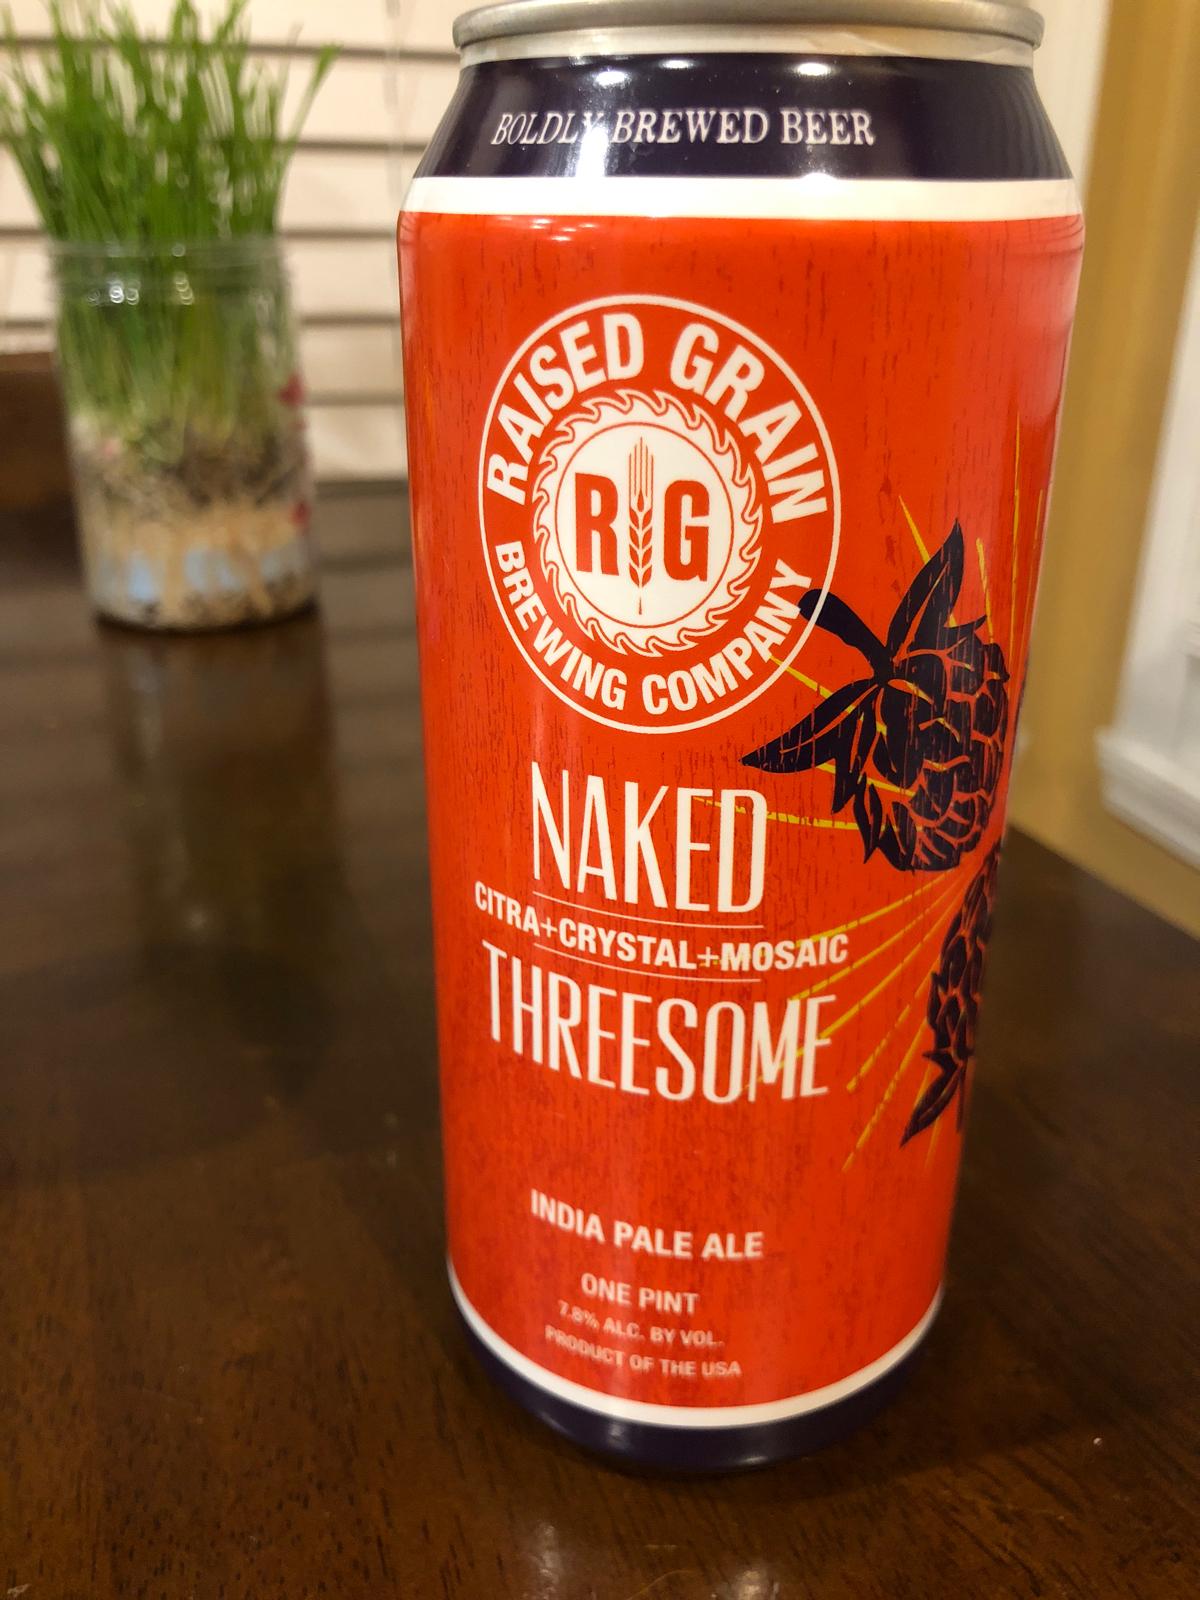 Naked Threesome, Double Dry Hopped (Citra, Crystal, Mosaic)